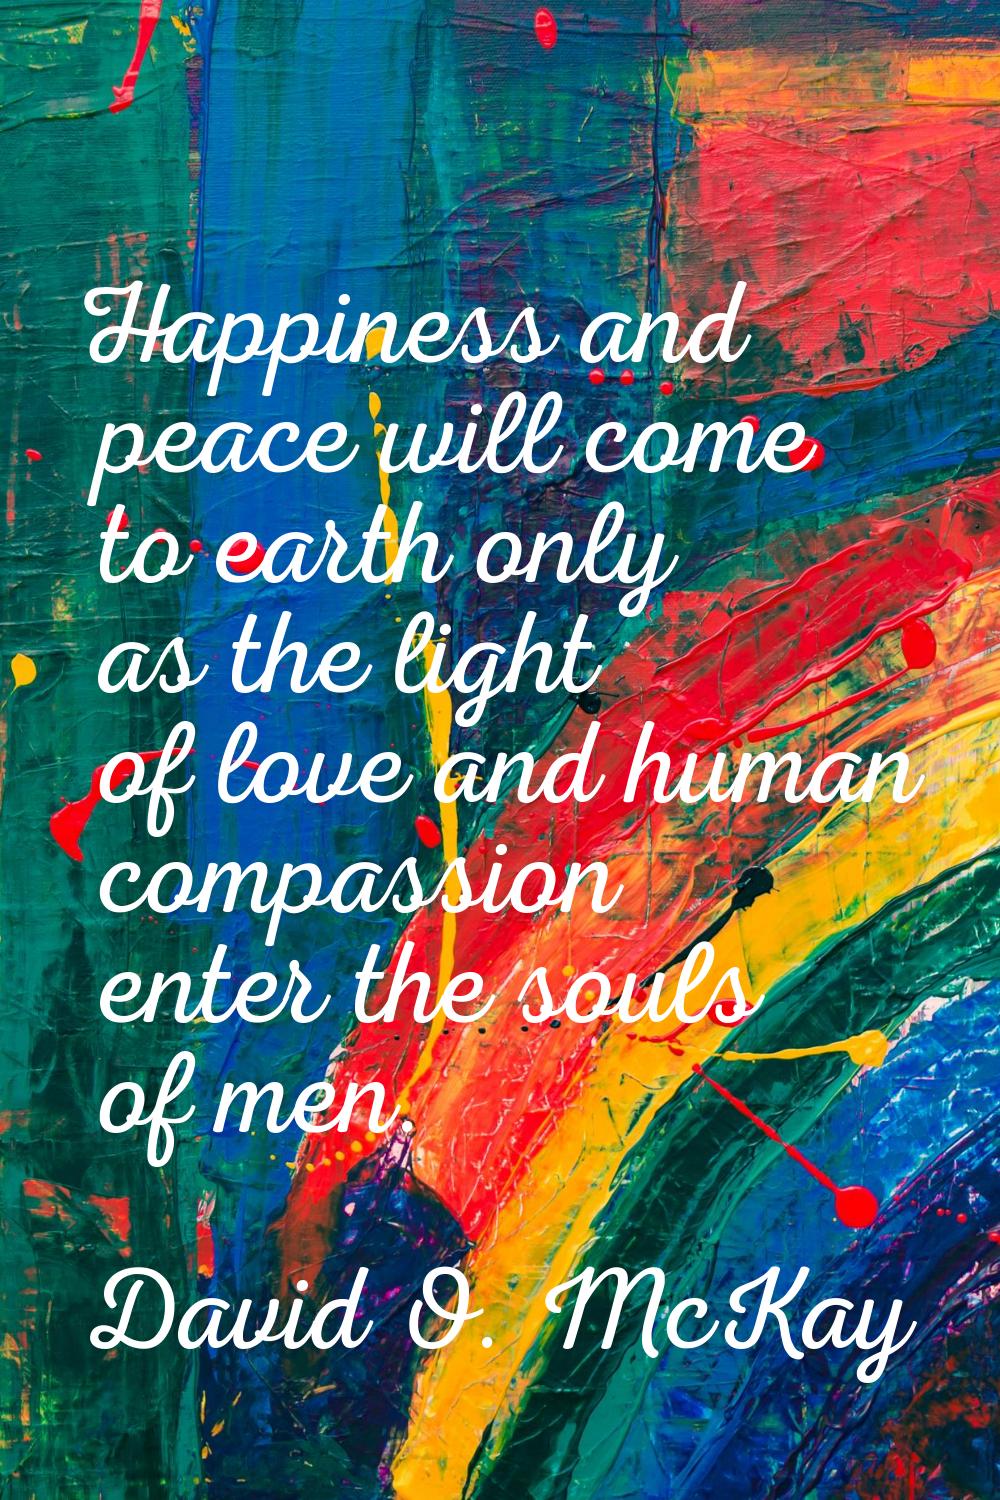 Happiness and peace will come to earth only as the light of love and human compassion enter the sou